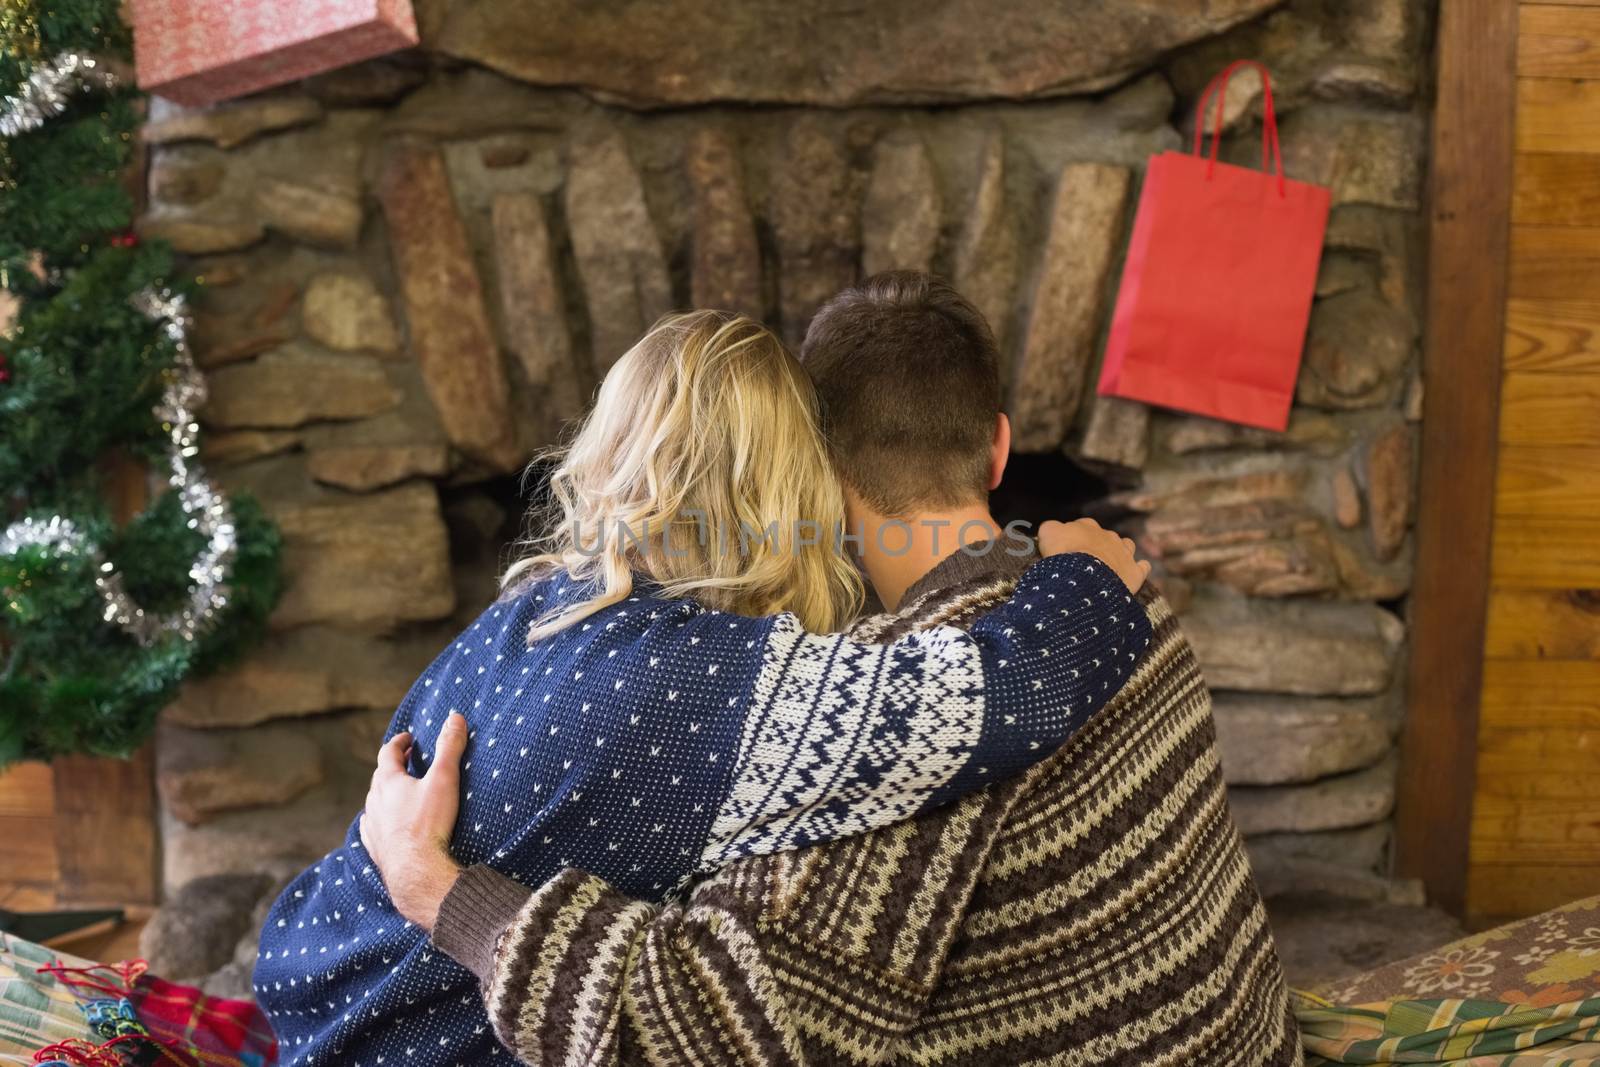 Romantic couple embracing in front of fireplace by Wavebreakmedia